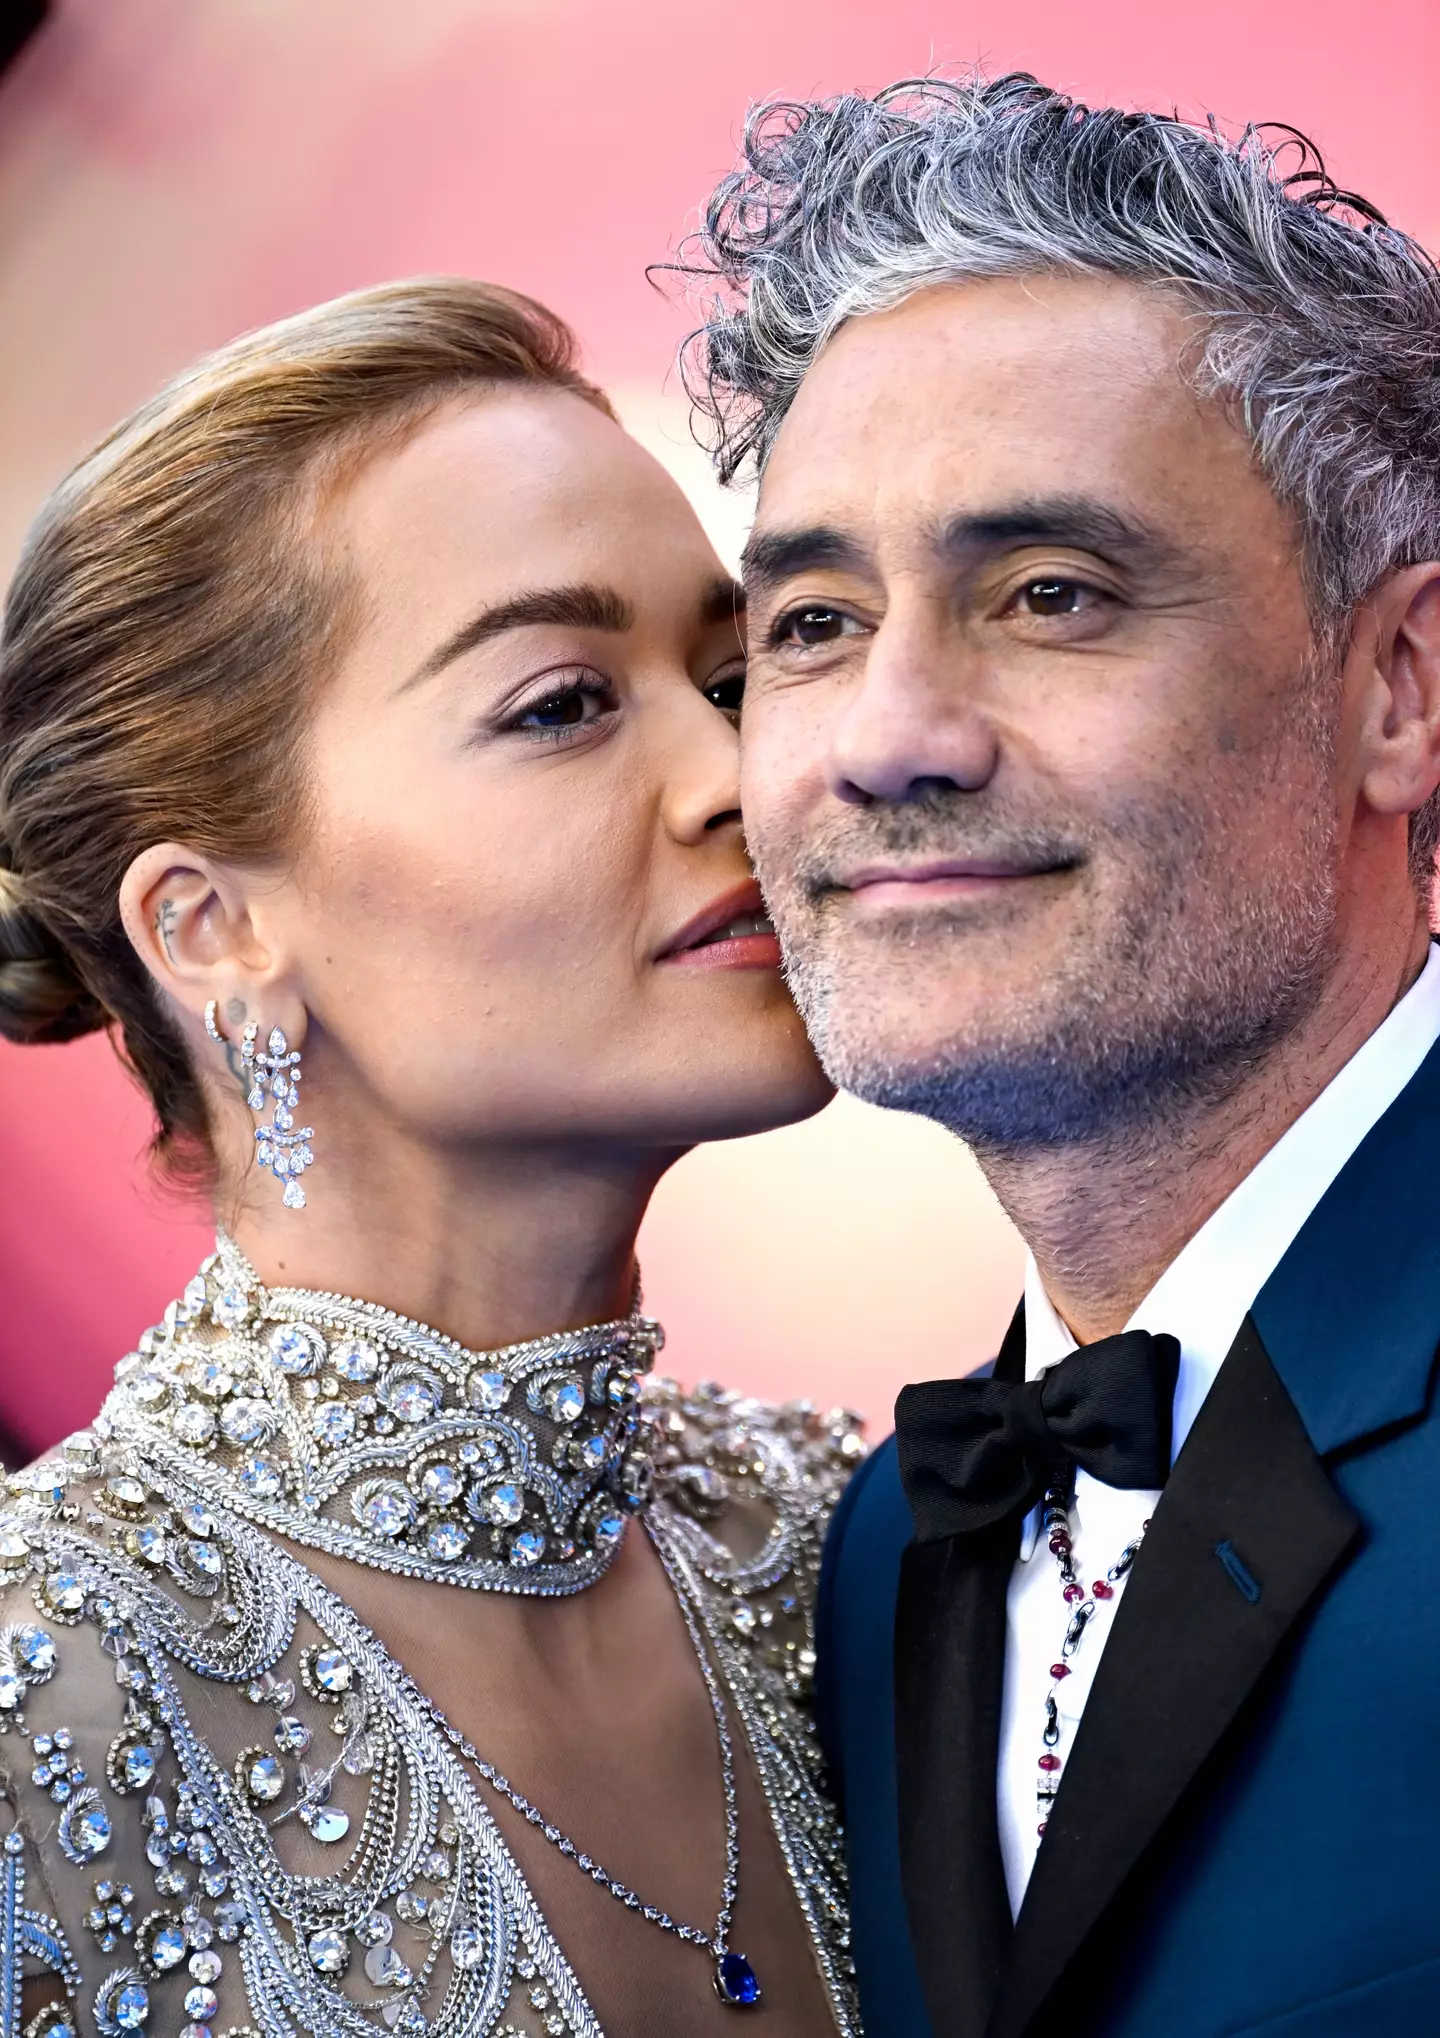 Rita and Taika married in a secret ceremony last summer.